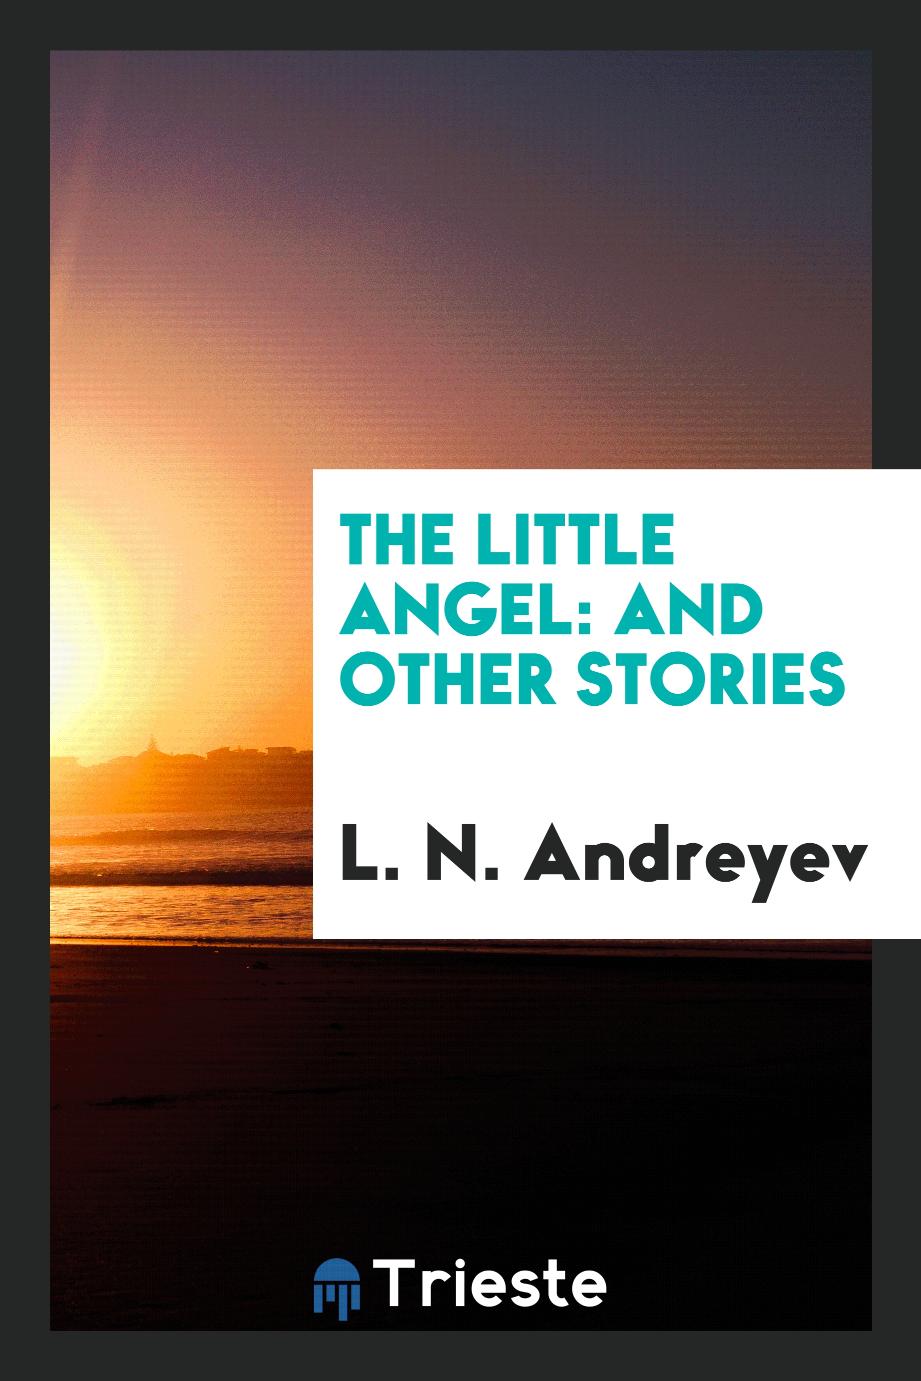 The Little angel: and other stories